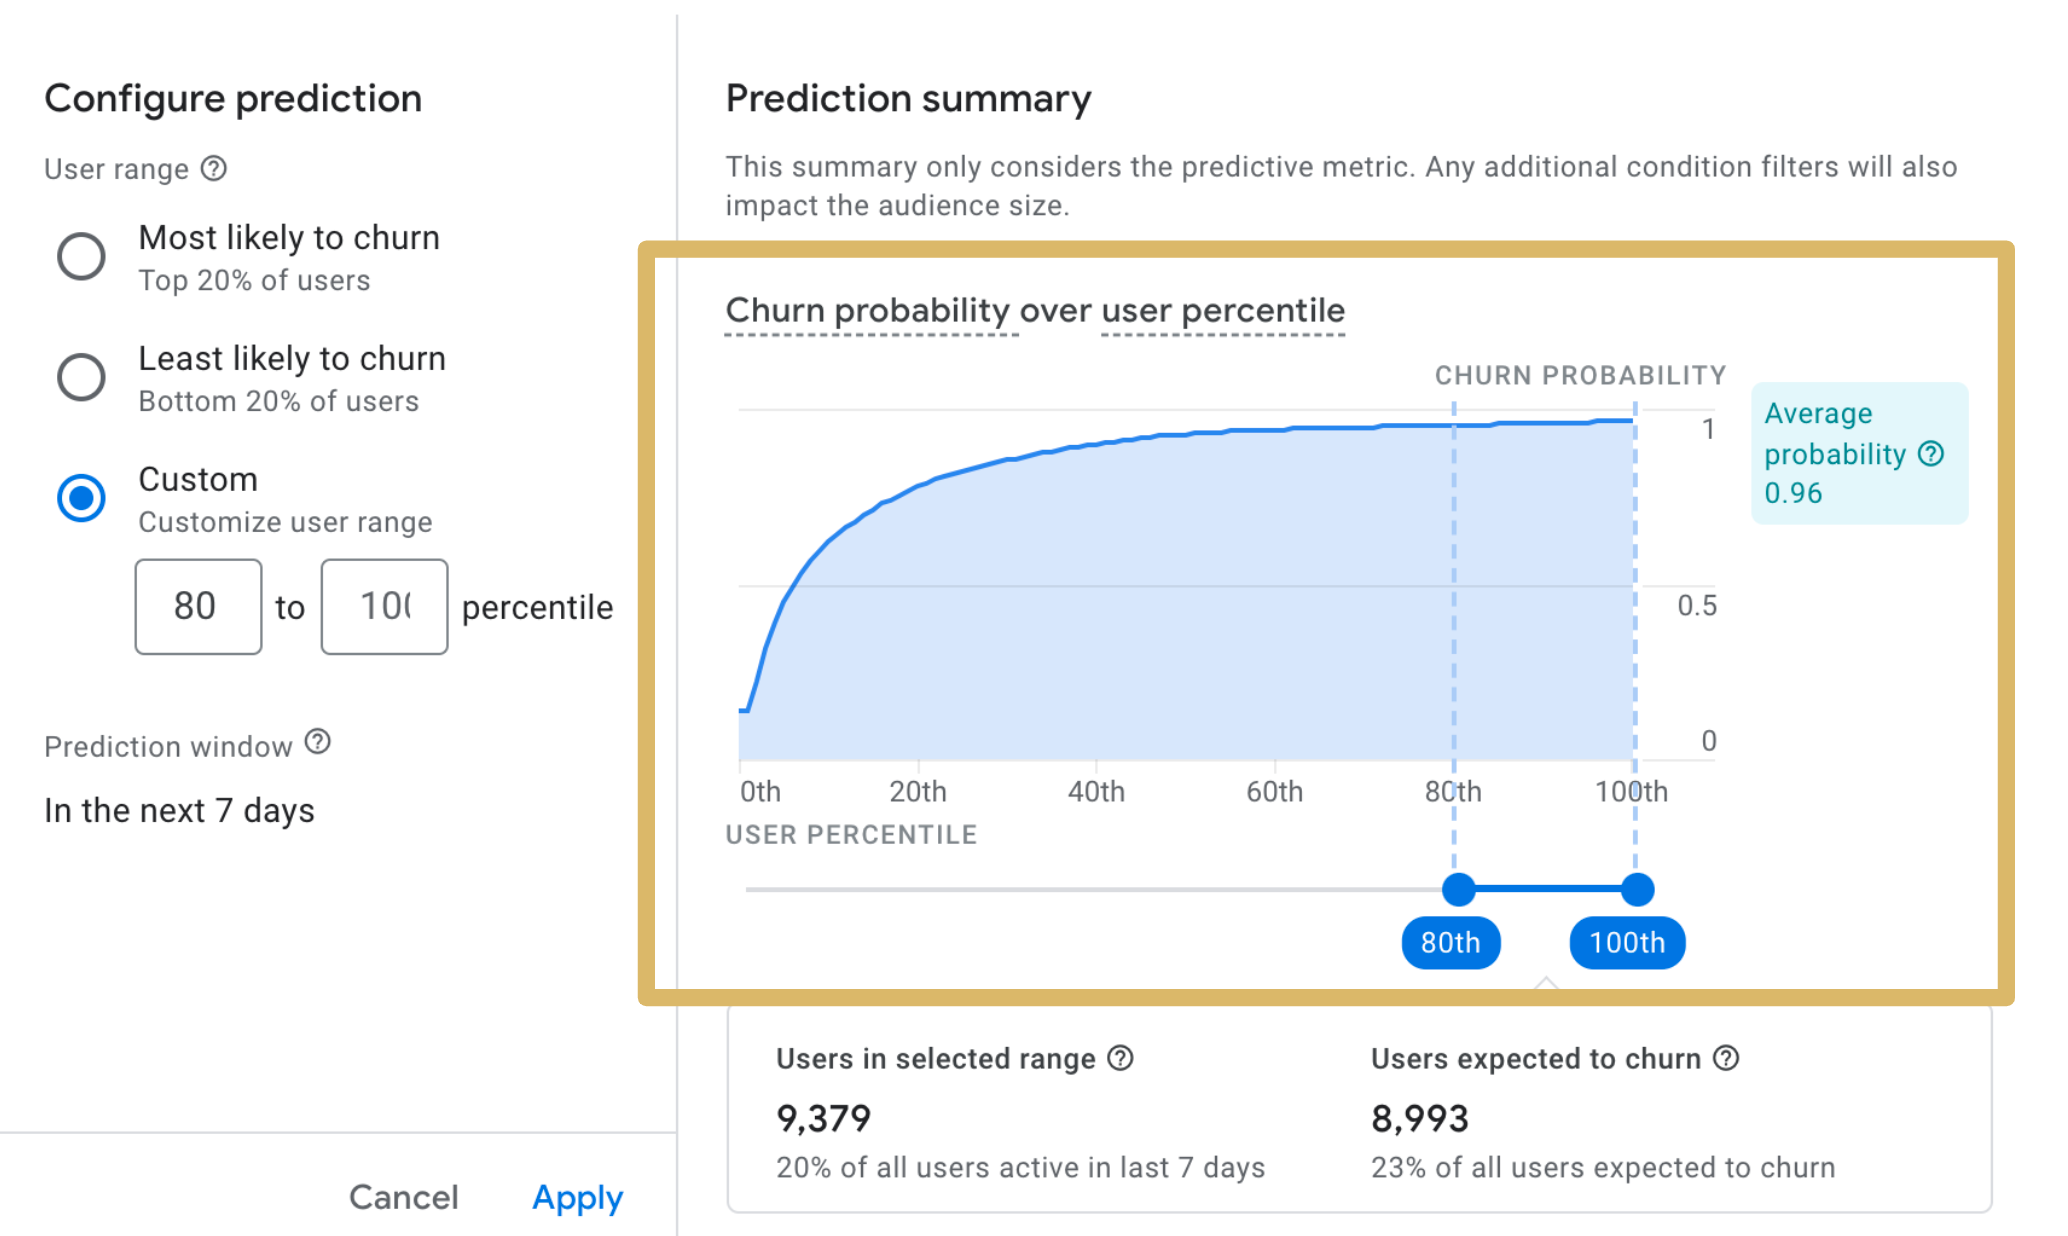 Prediction summary: churn probability of audience 